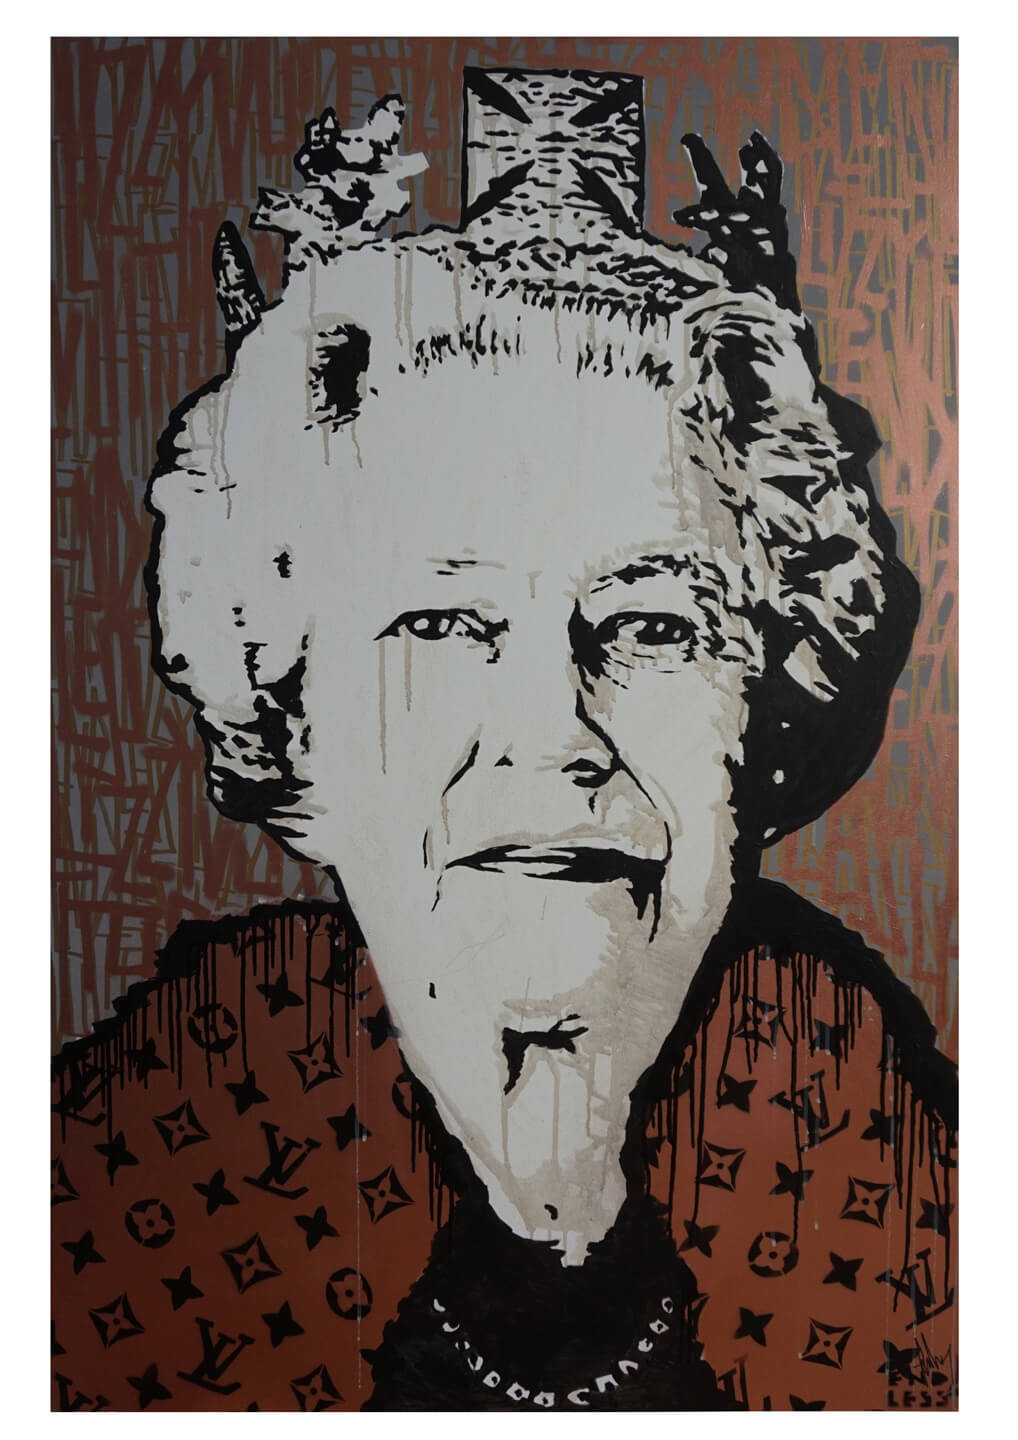 LIZZY VUITTON METALLIC DRIPS, 101 x 152cm, acrylic and spray paint on canvas 